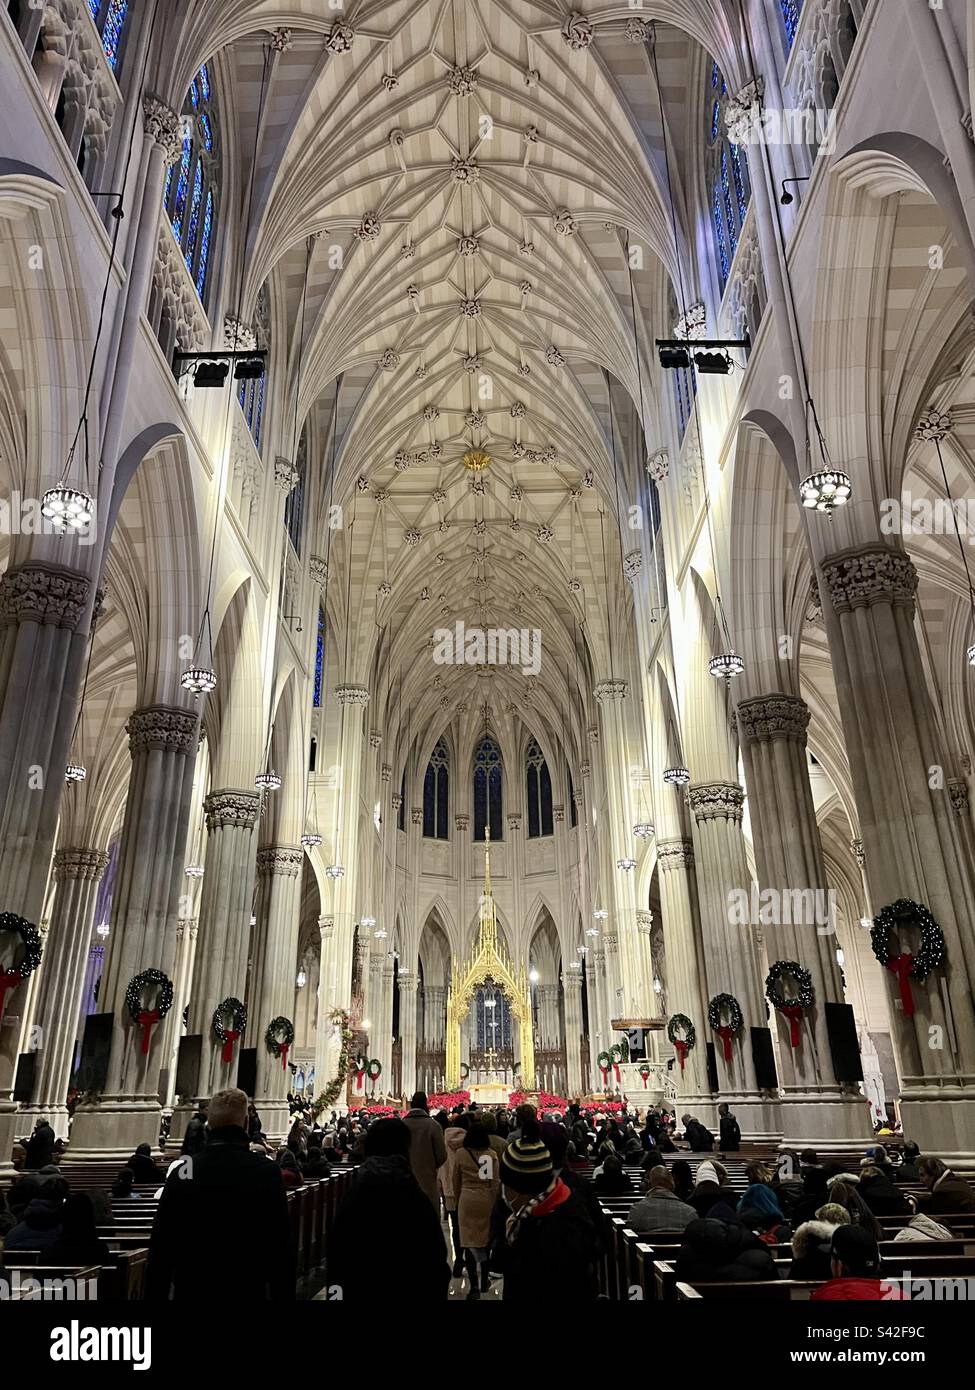 Interior architecture of St. Patrick's Cathedral in New York. Photo taken in New York in December 2022 Stock Photo